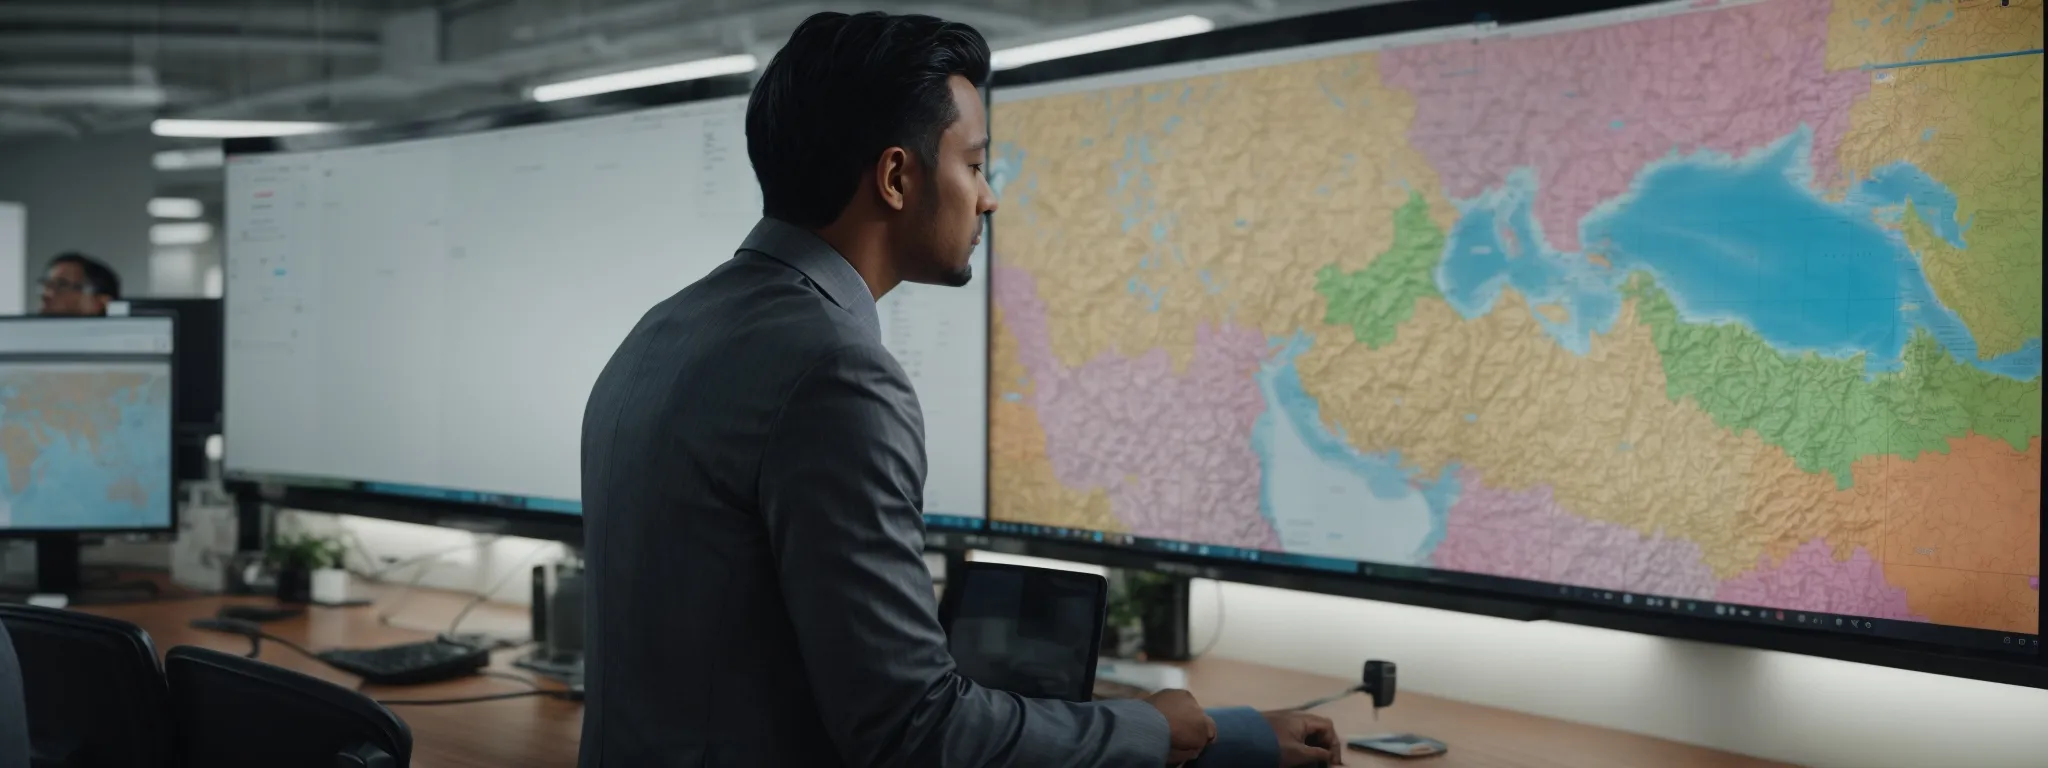 a marketer analyzing a vibrant, color-coded map representing different regions' search volume on a large monitor in a modern office setting.